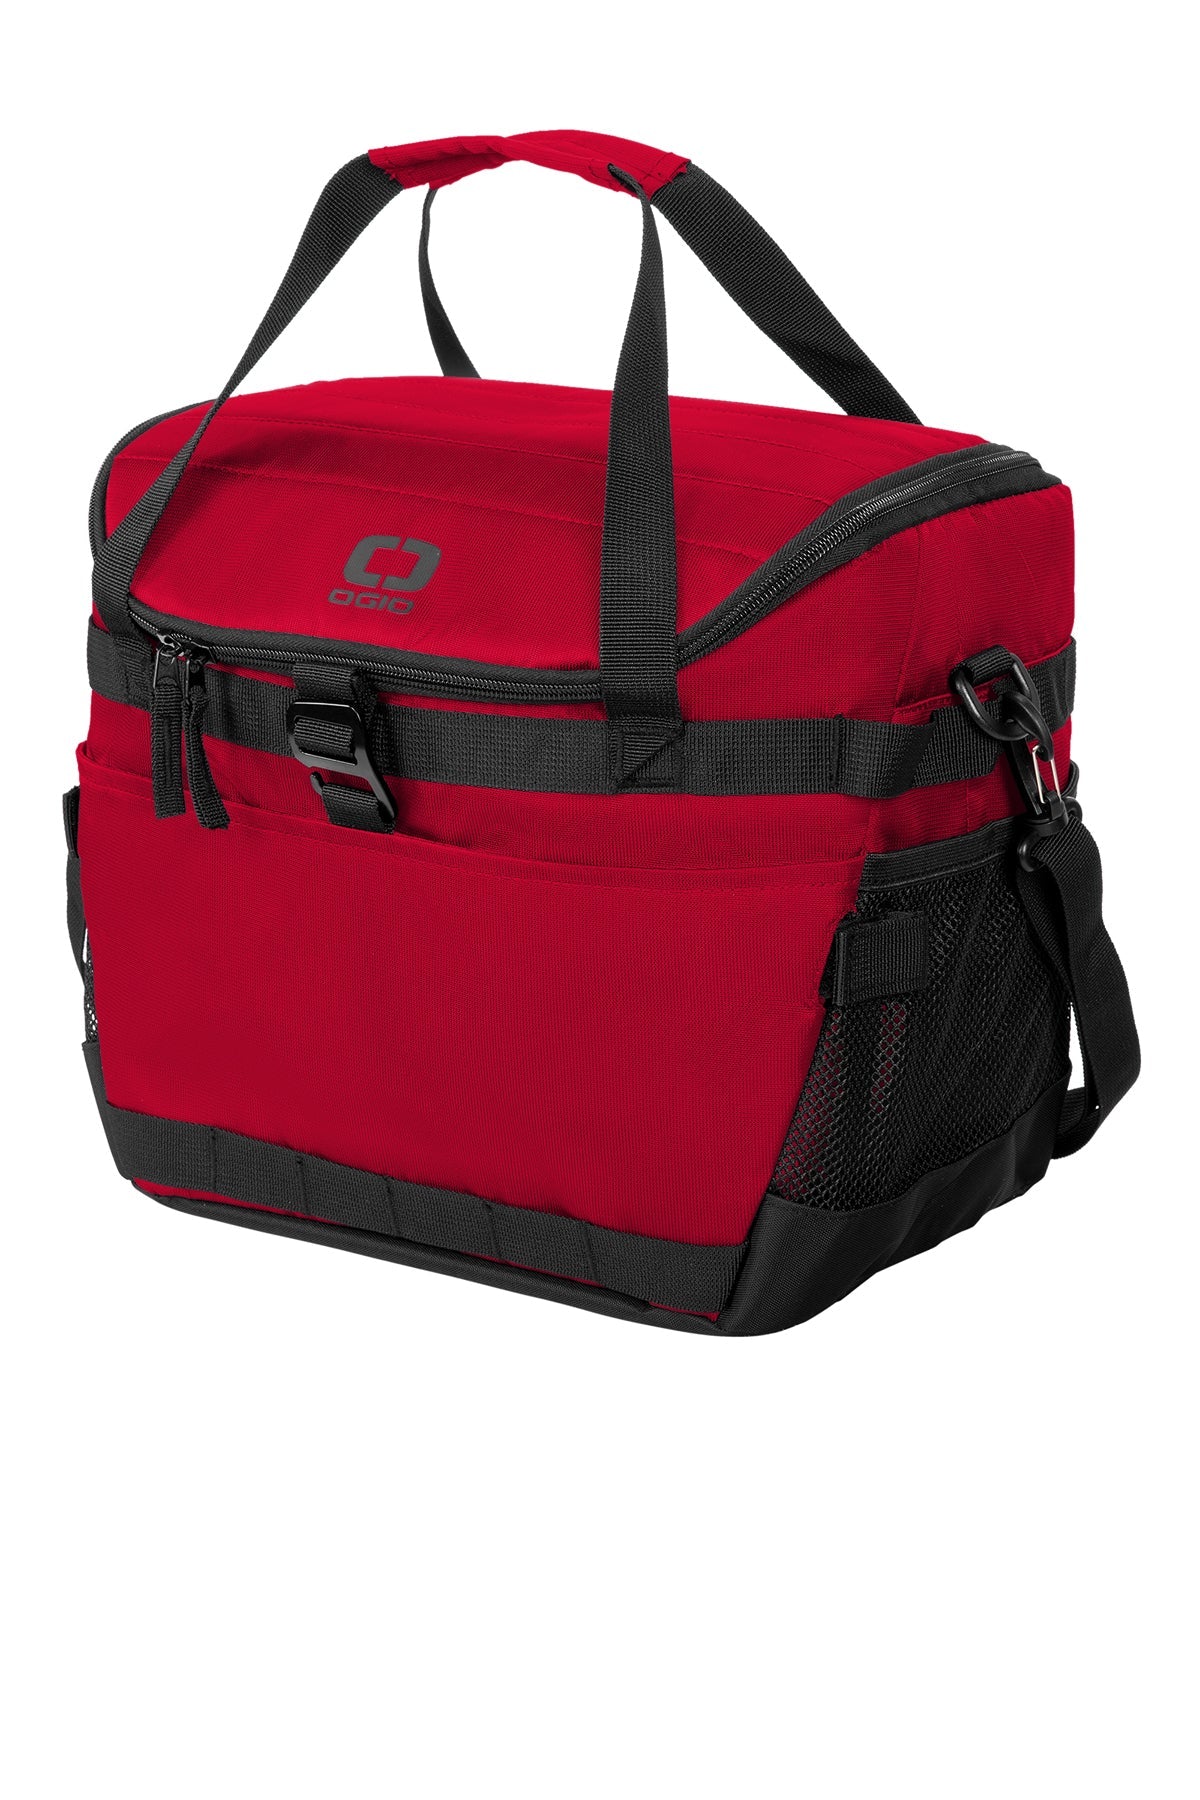 OGIO Sprint 24-Pack Customzied Coolers, Signal Red